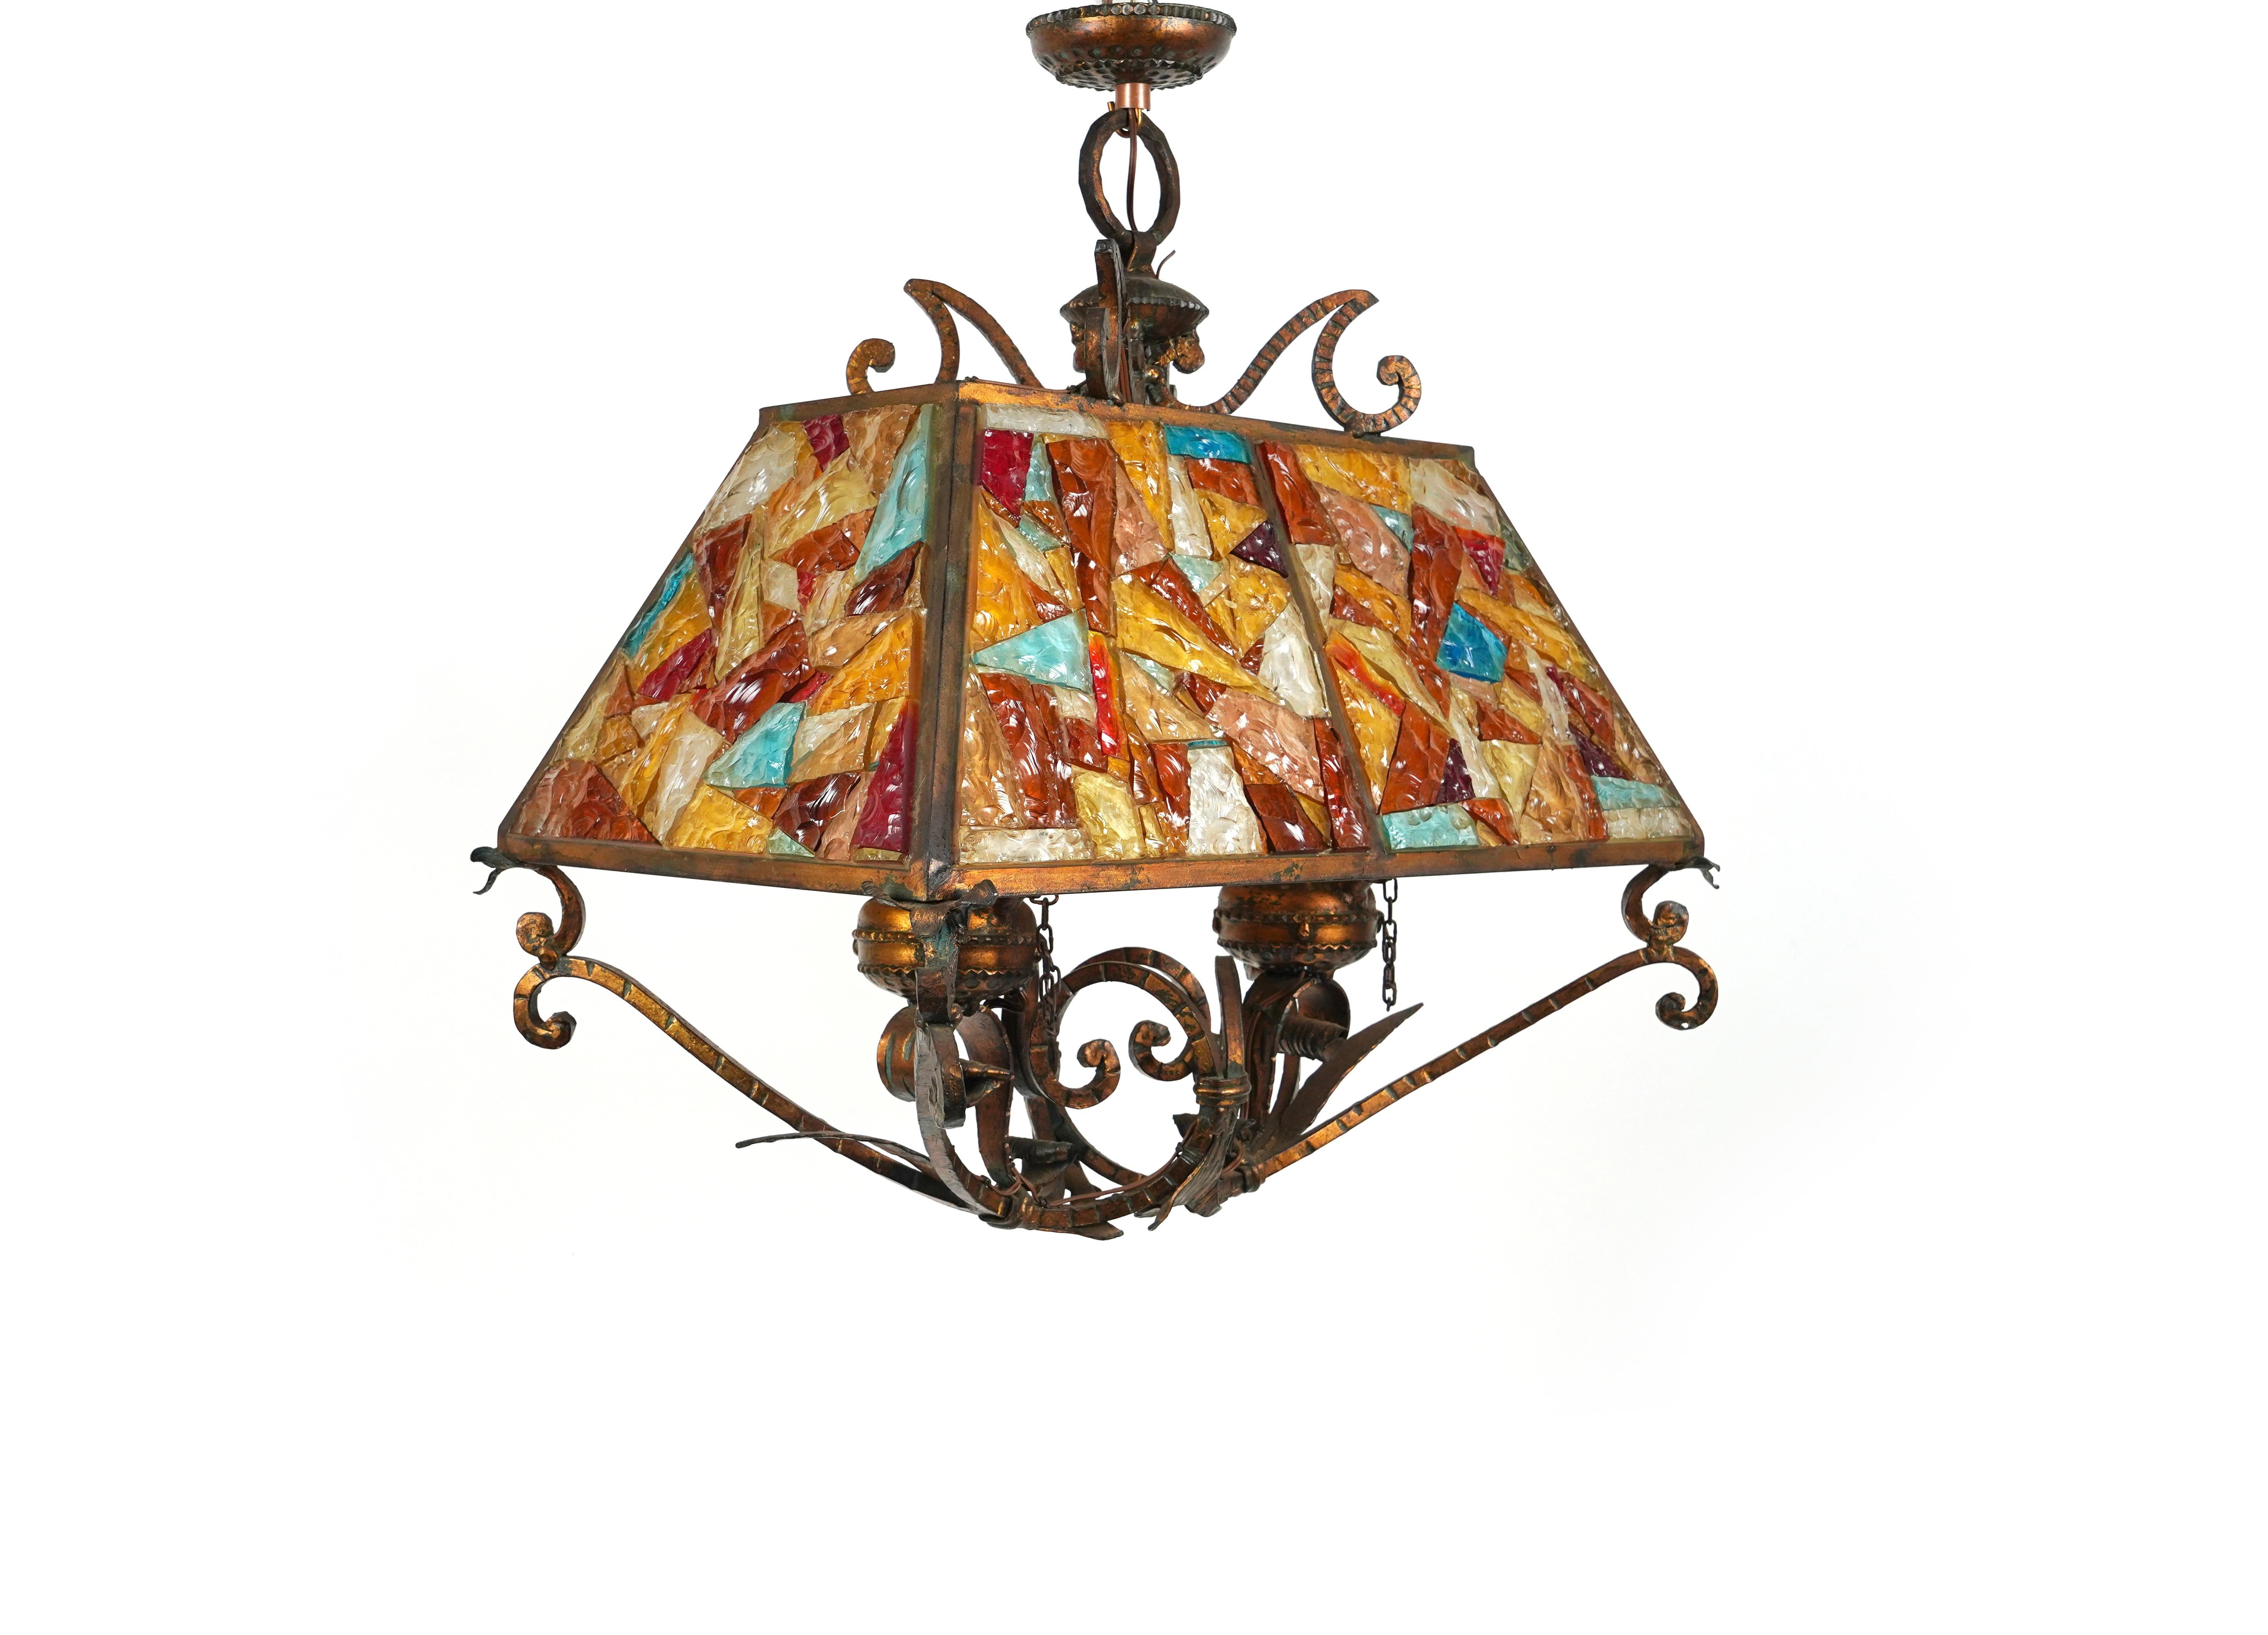 Italian Chandelier Lantern Wrought Iron and Hammered Glass by Longobard, Italy, 1970s For Sale